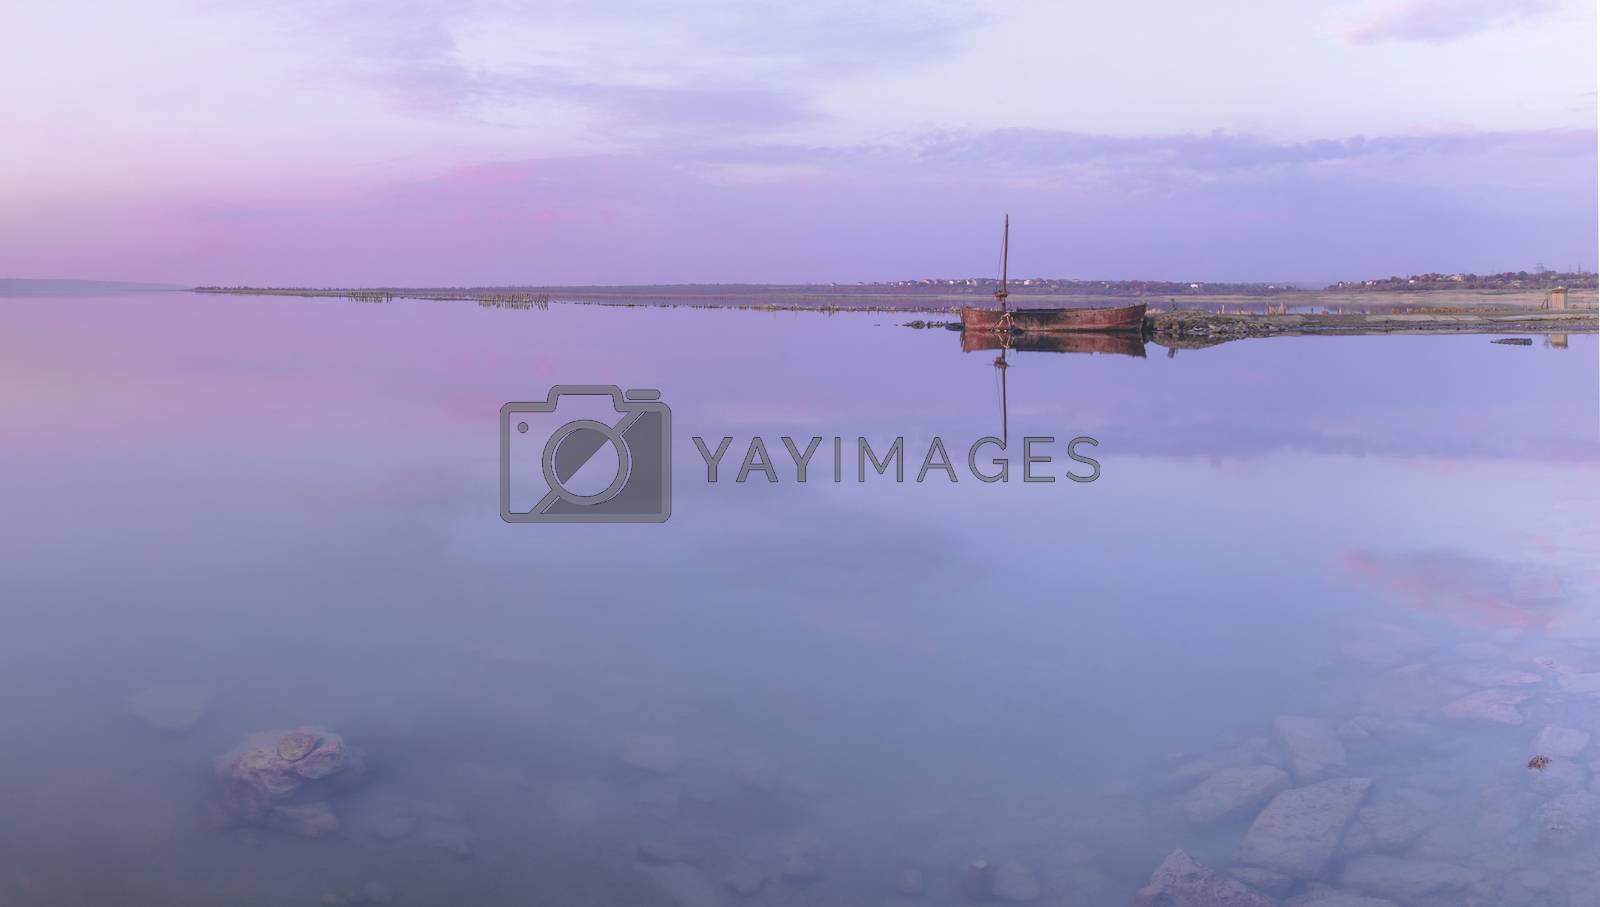 Royalty free image of Panoramic view of the salt lake at sunset by Multipedia